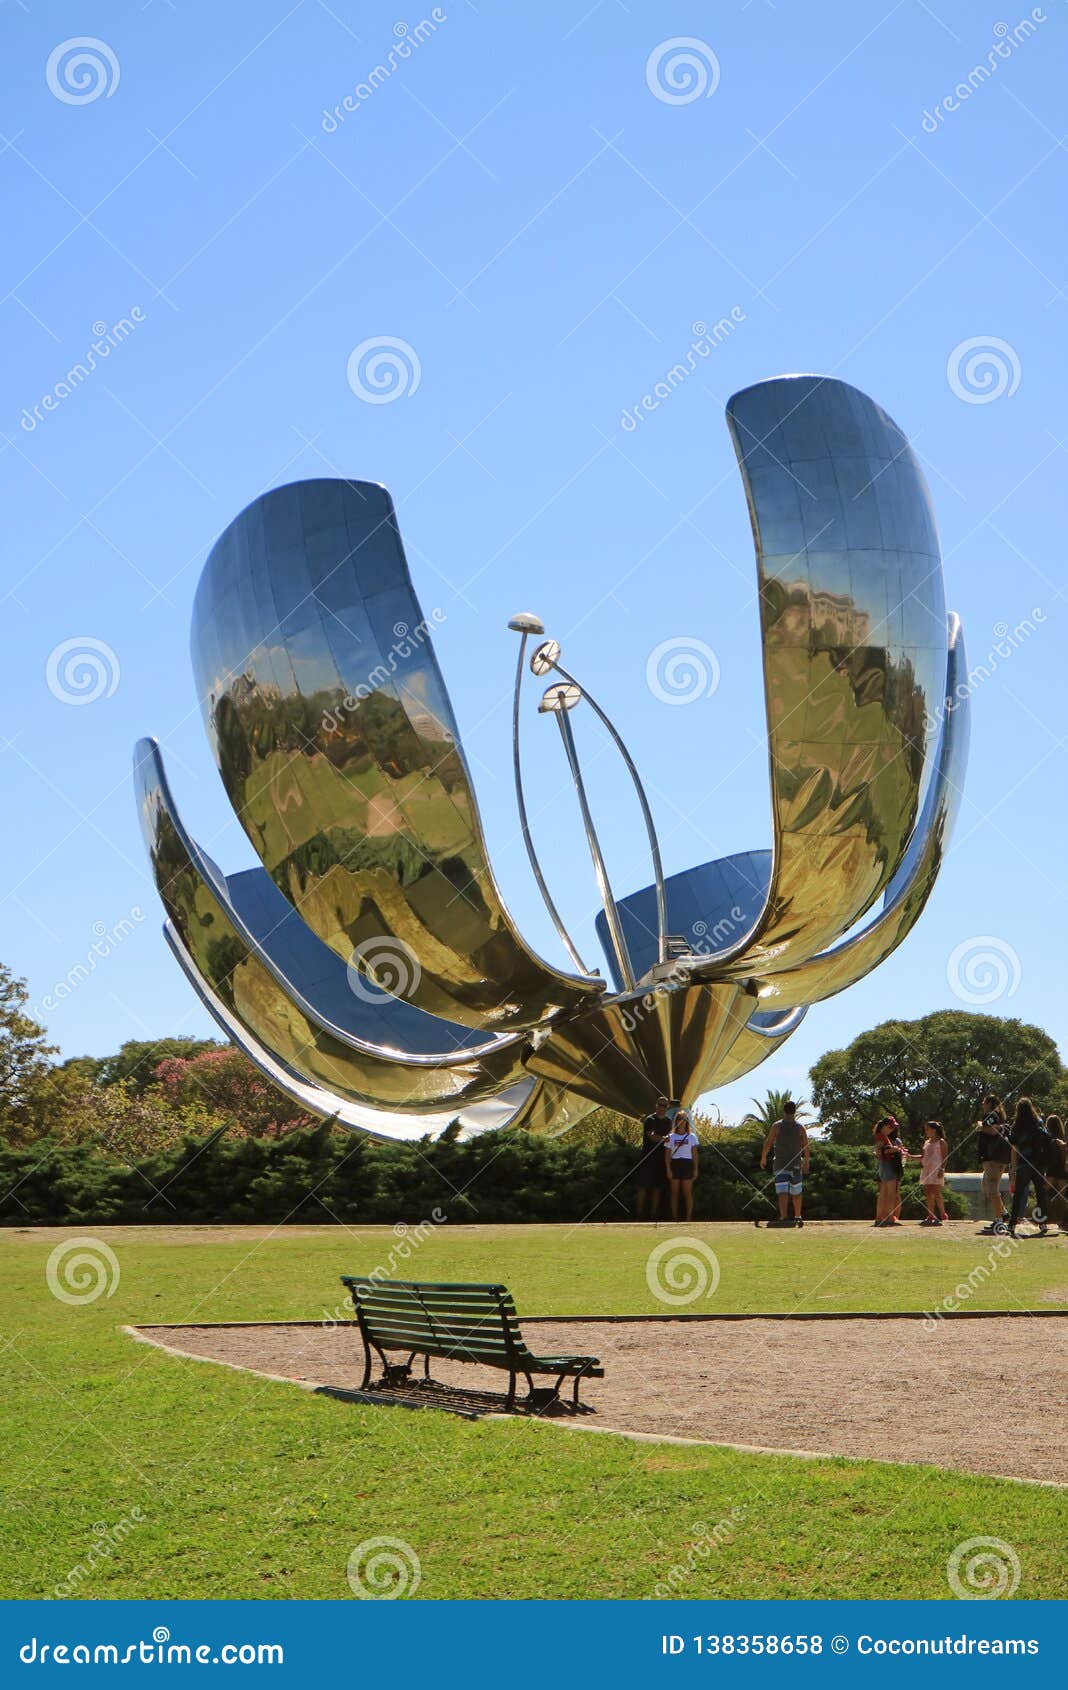 famous flower sculpture called floralis generica, made of steel and aluminum by argentine architect eduardo catalano, argentina